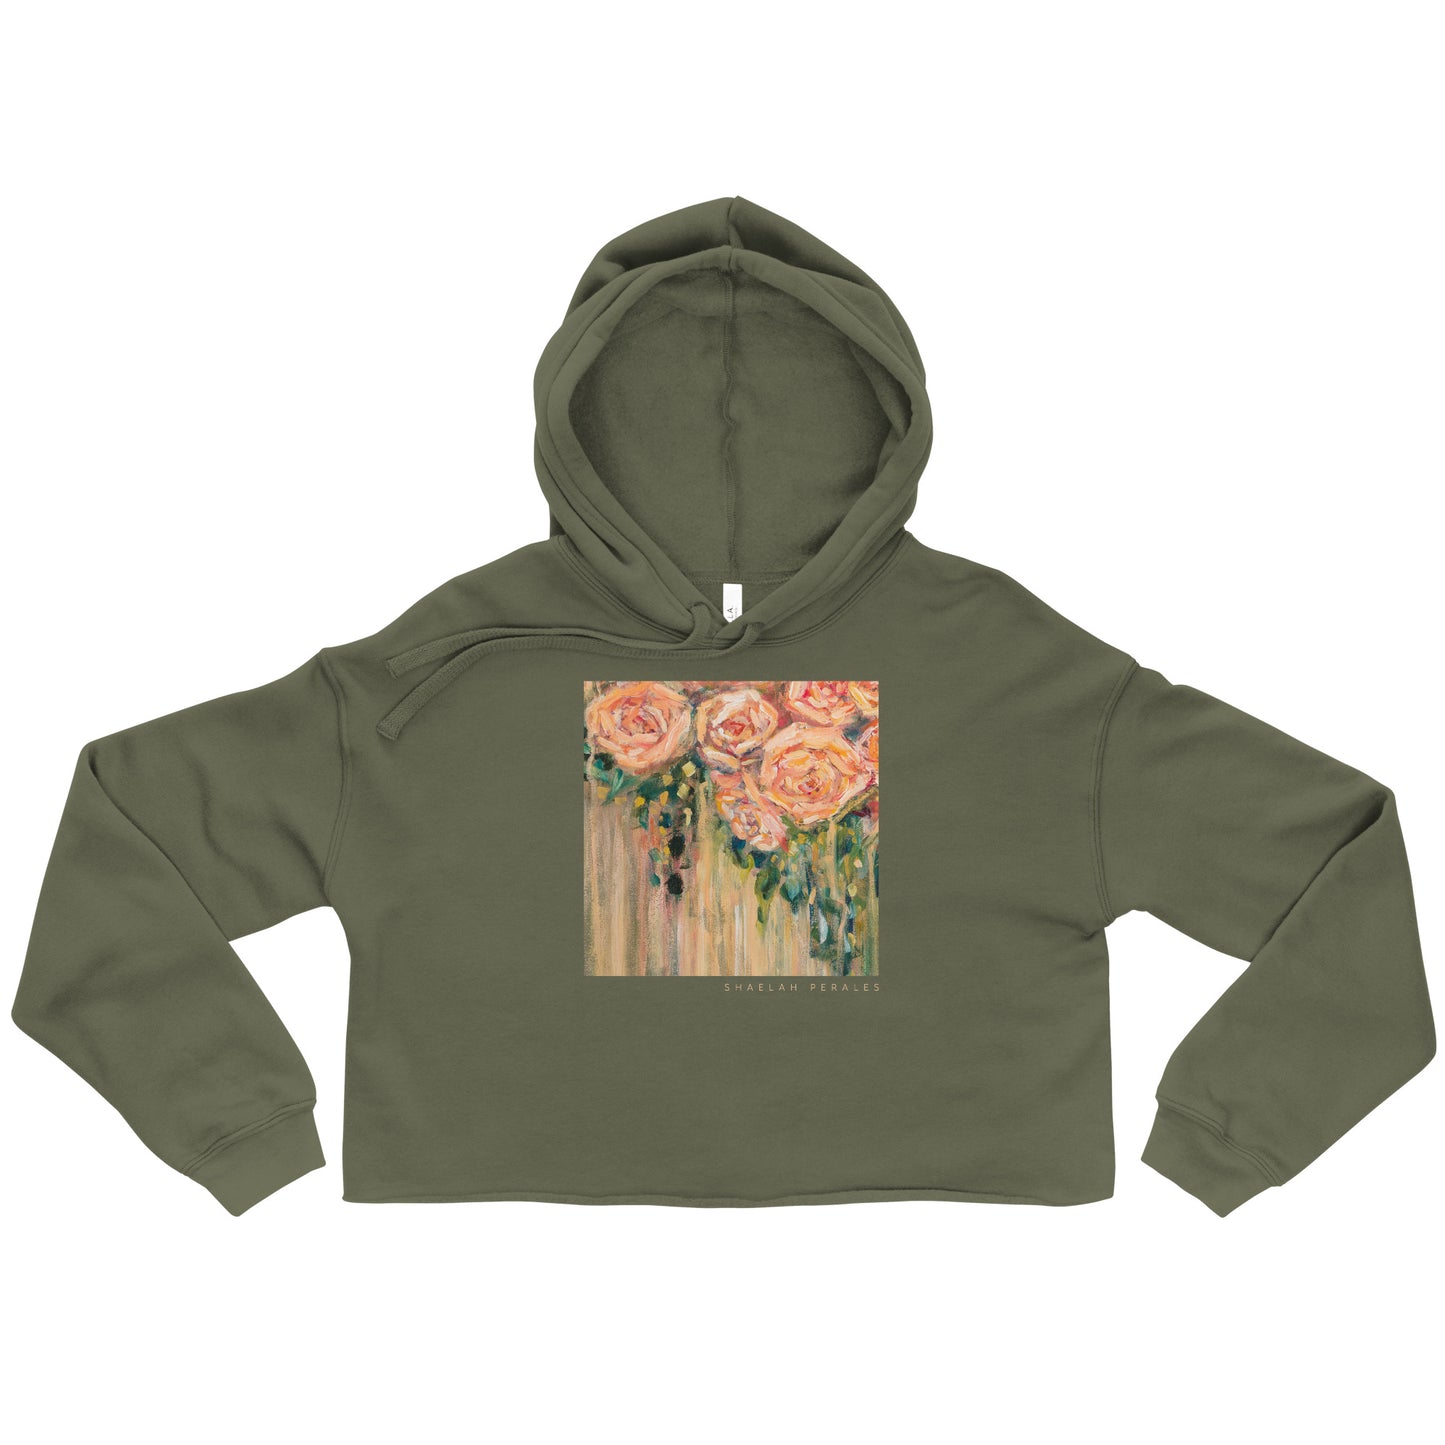 "Roses from Above" Crop Hoodie in Perfect Green